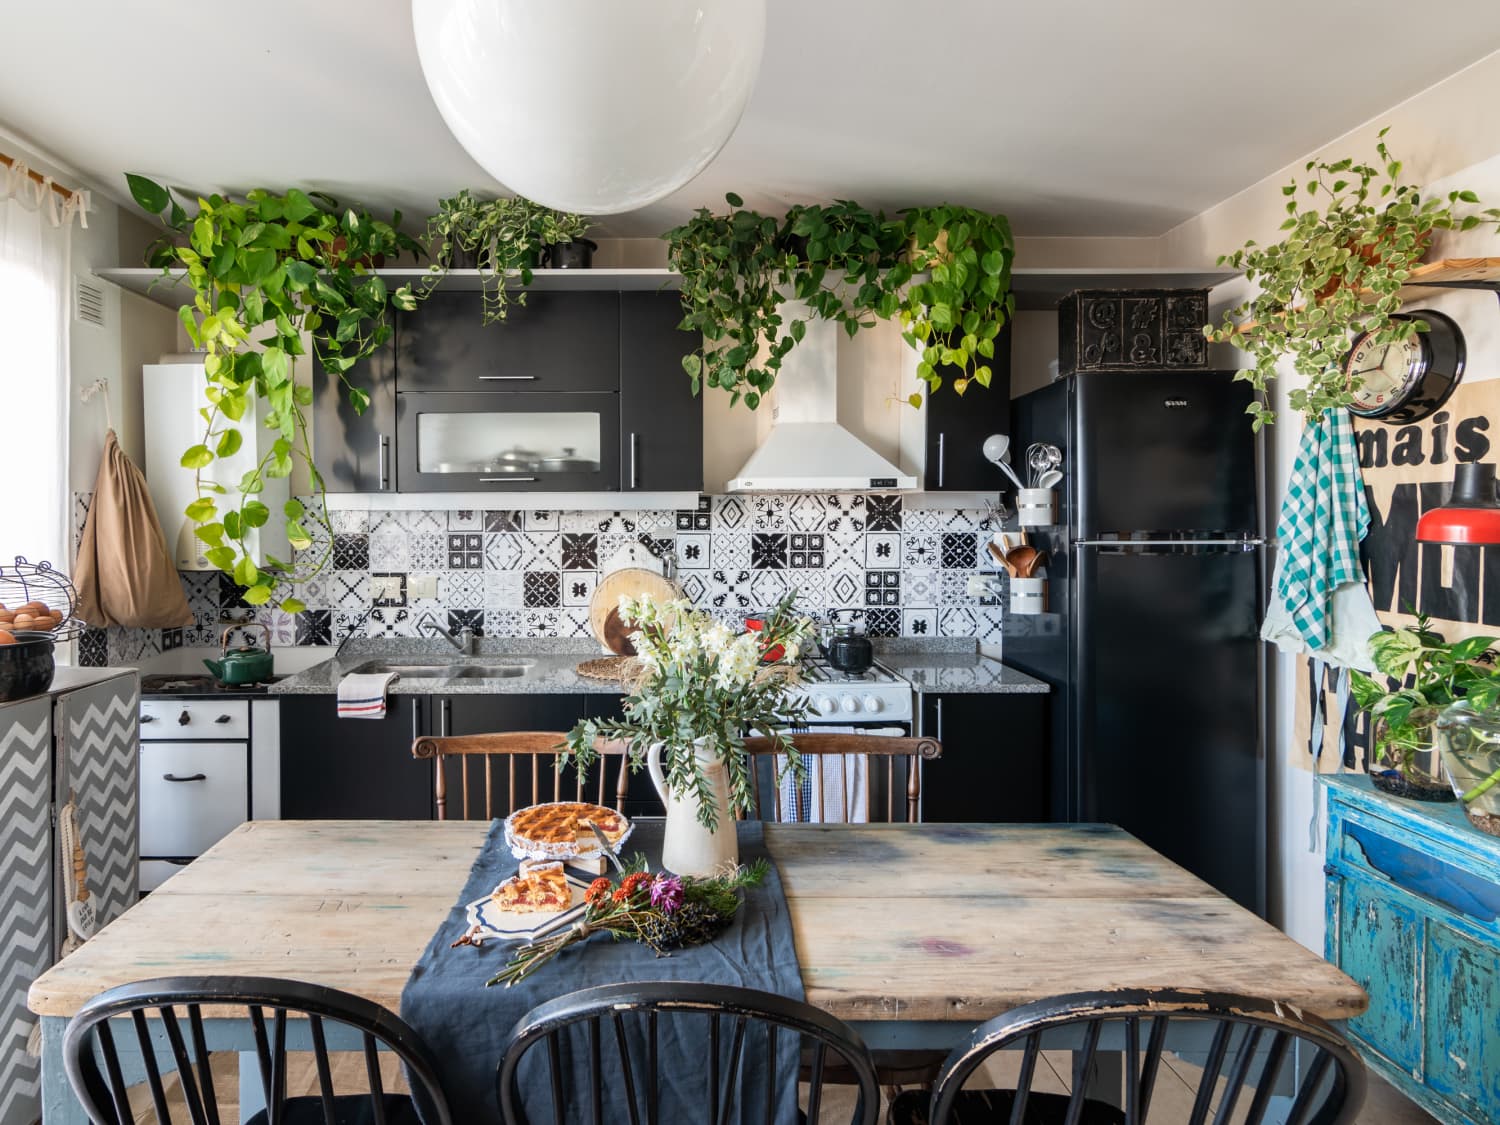 Bohemian Kitchen Inspirations: Plants, Patterns, and More ...